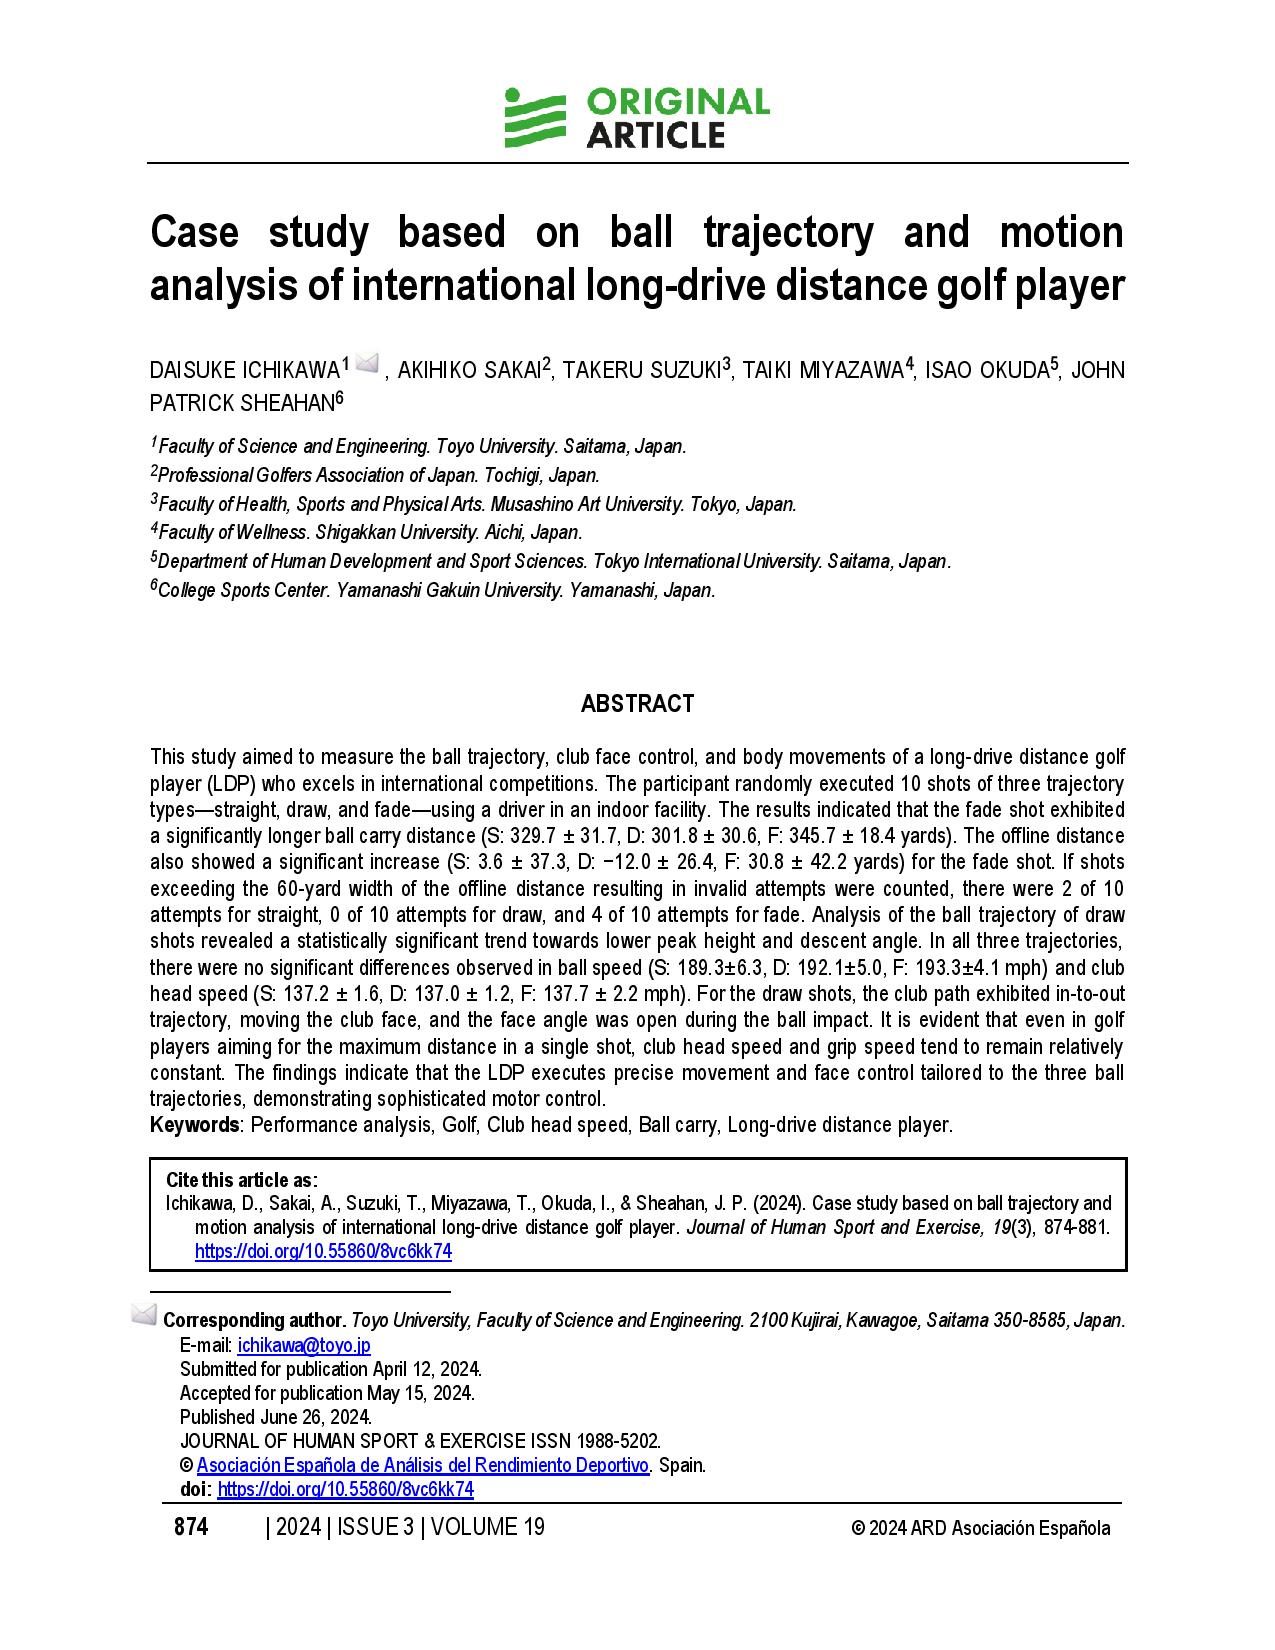 Case study based on ball trajectory and motion analysis of international long-drive distance golf player